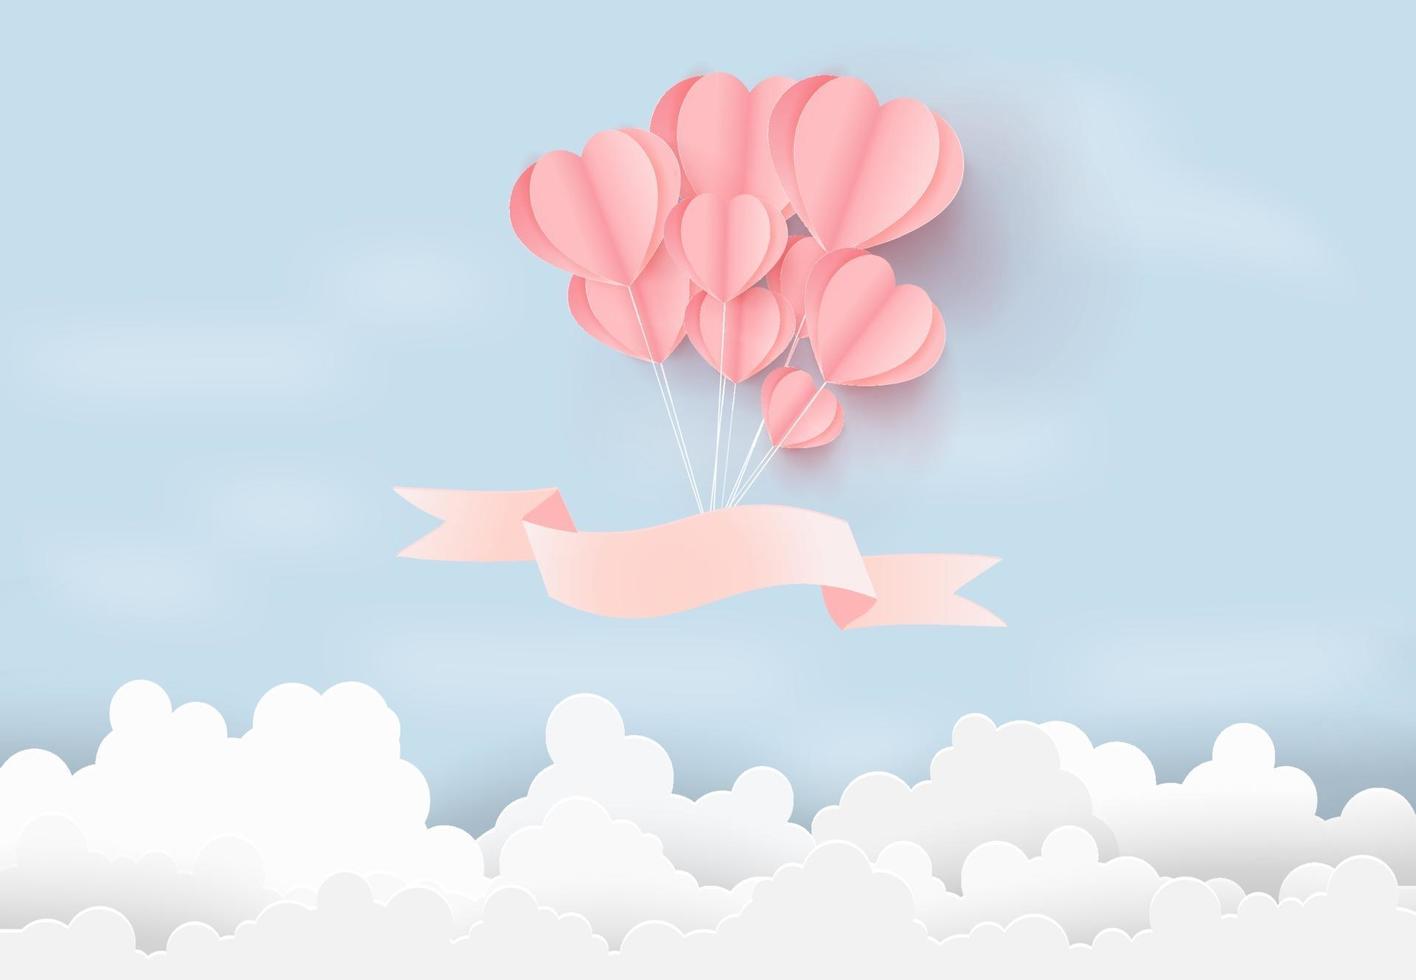 illustration for love with heart balloons floating in the sky, valentine's concept. Paper art style. vector